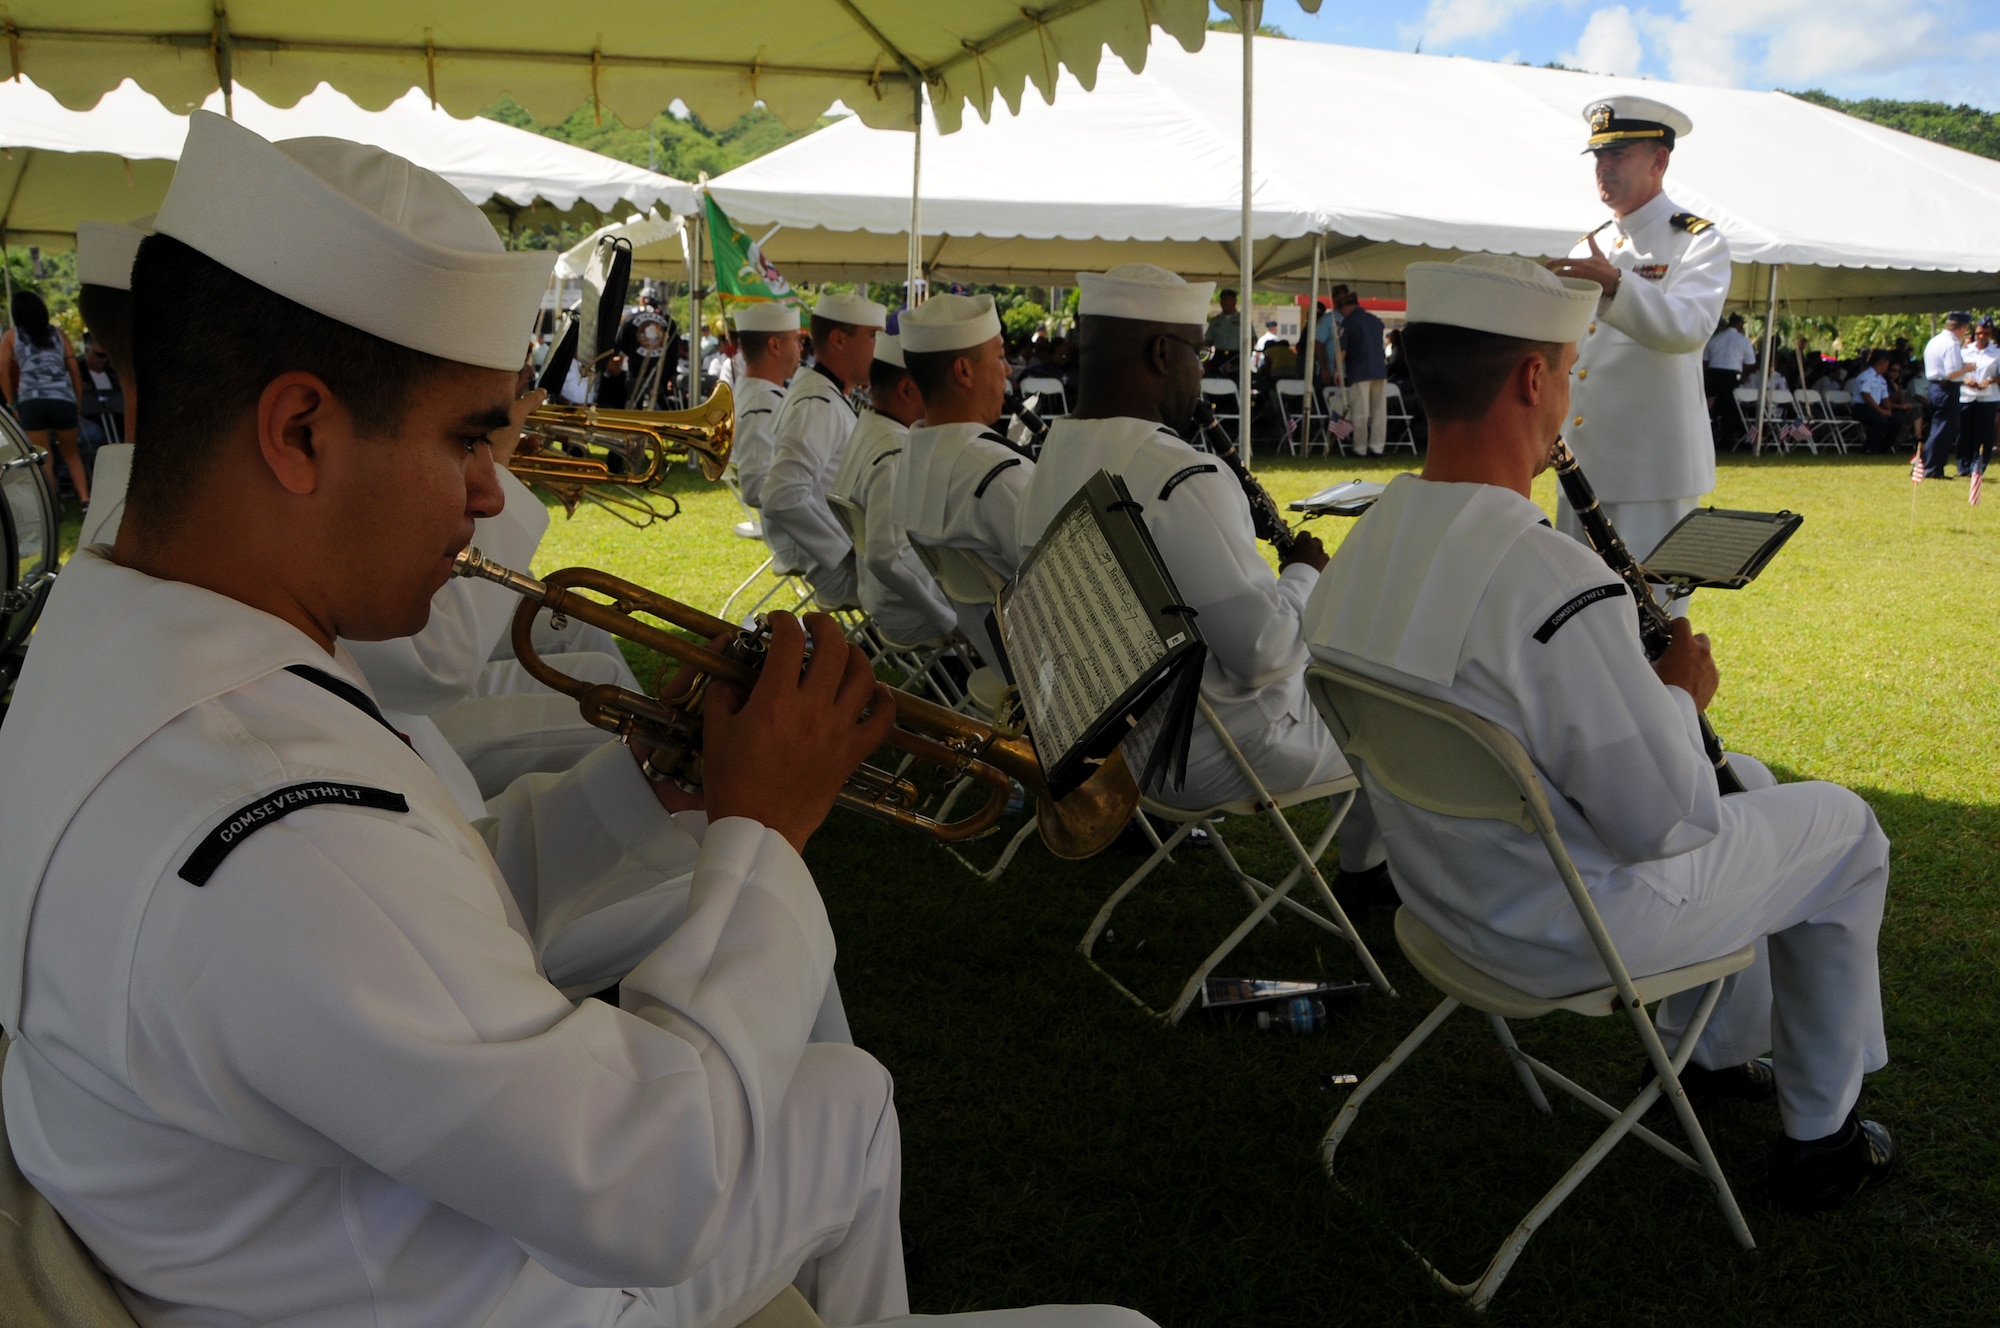 ANDERSEN AIR FORCE BASE, Guam - The United States Navy Seventh Fleet Band kicks of the Veterans Day Ceremony at the Ricardo J. Bordallo Governors Complex in Adelup, Guam Nov. 11. Branches both active and retired attended the ceremony (U.S. Air Force photo by Airman 1st Class Courtney Witt)
 